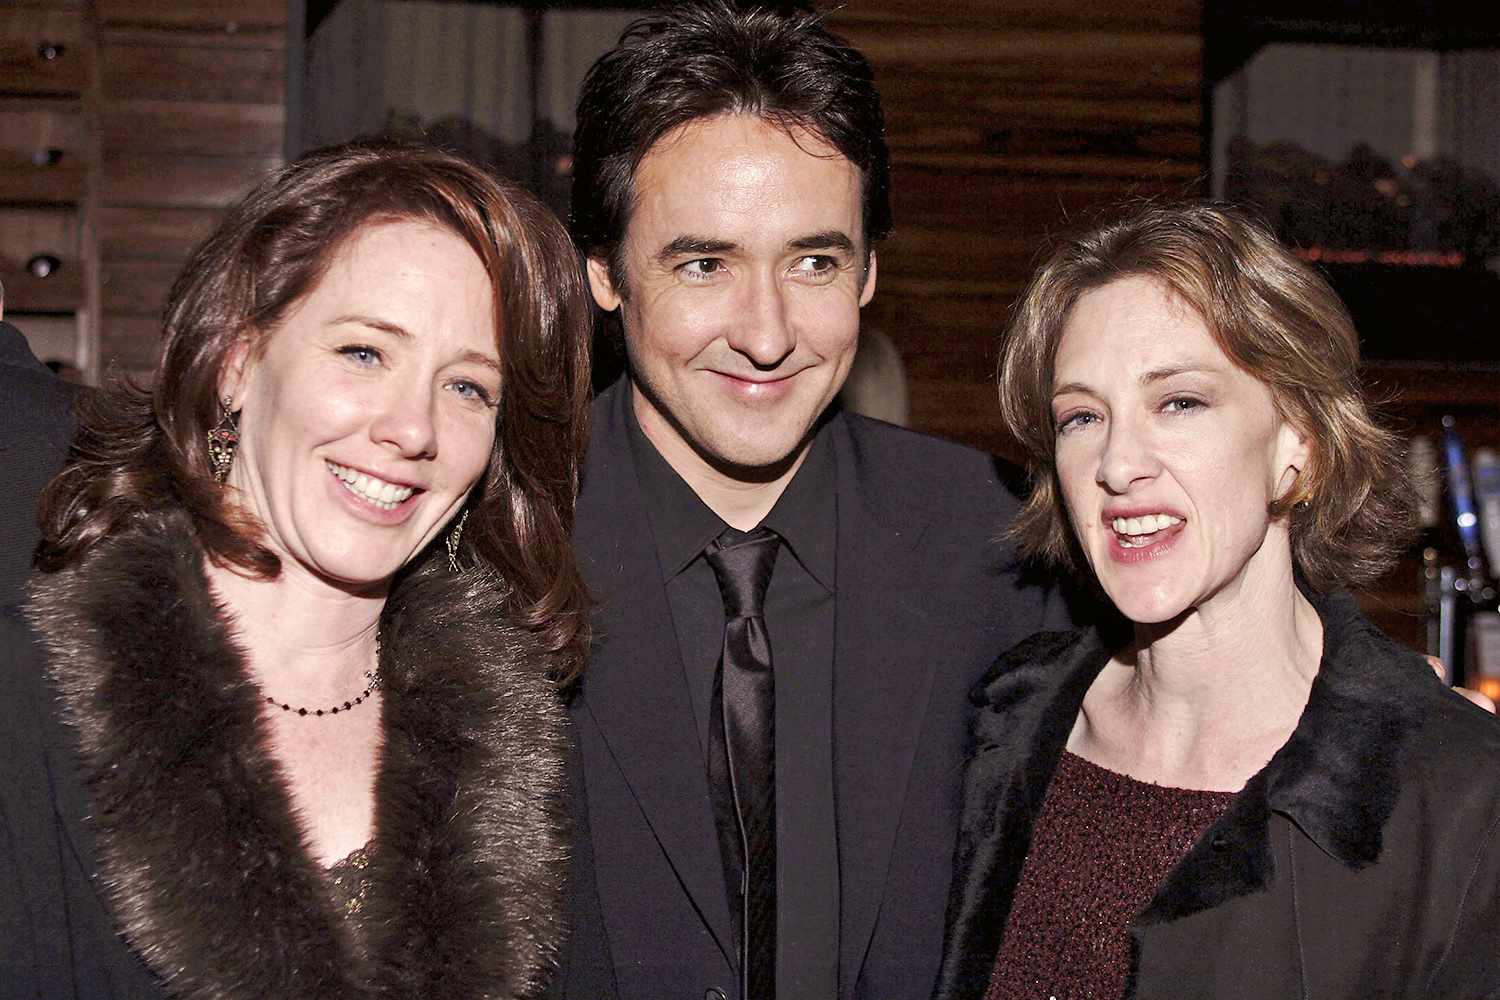 CHICAGO - NOVEMBER 21: (U.S. TABS OUTS & HOLLYWOOD REPORTER OUT) Siblings (L-R) Ann, John, and Joan Cusack attend the after party for the Focus Features premiere of "The Ice Harvest" November 21, 2005 in Chicago, Illinois. (Photo by Matt Carmichael/Getty Images)